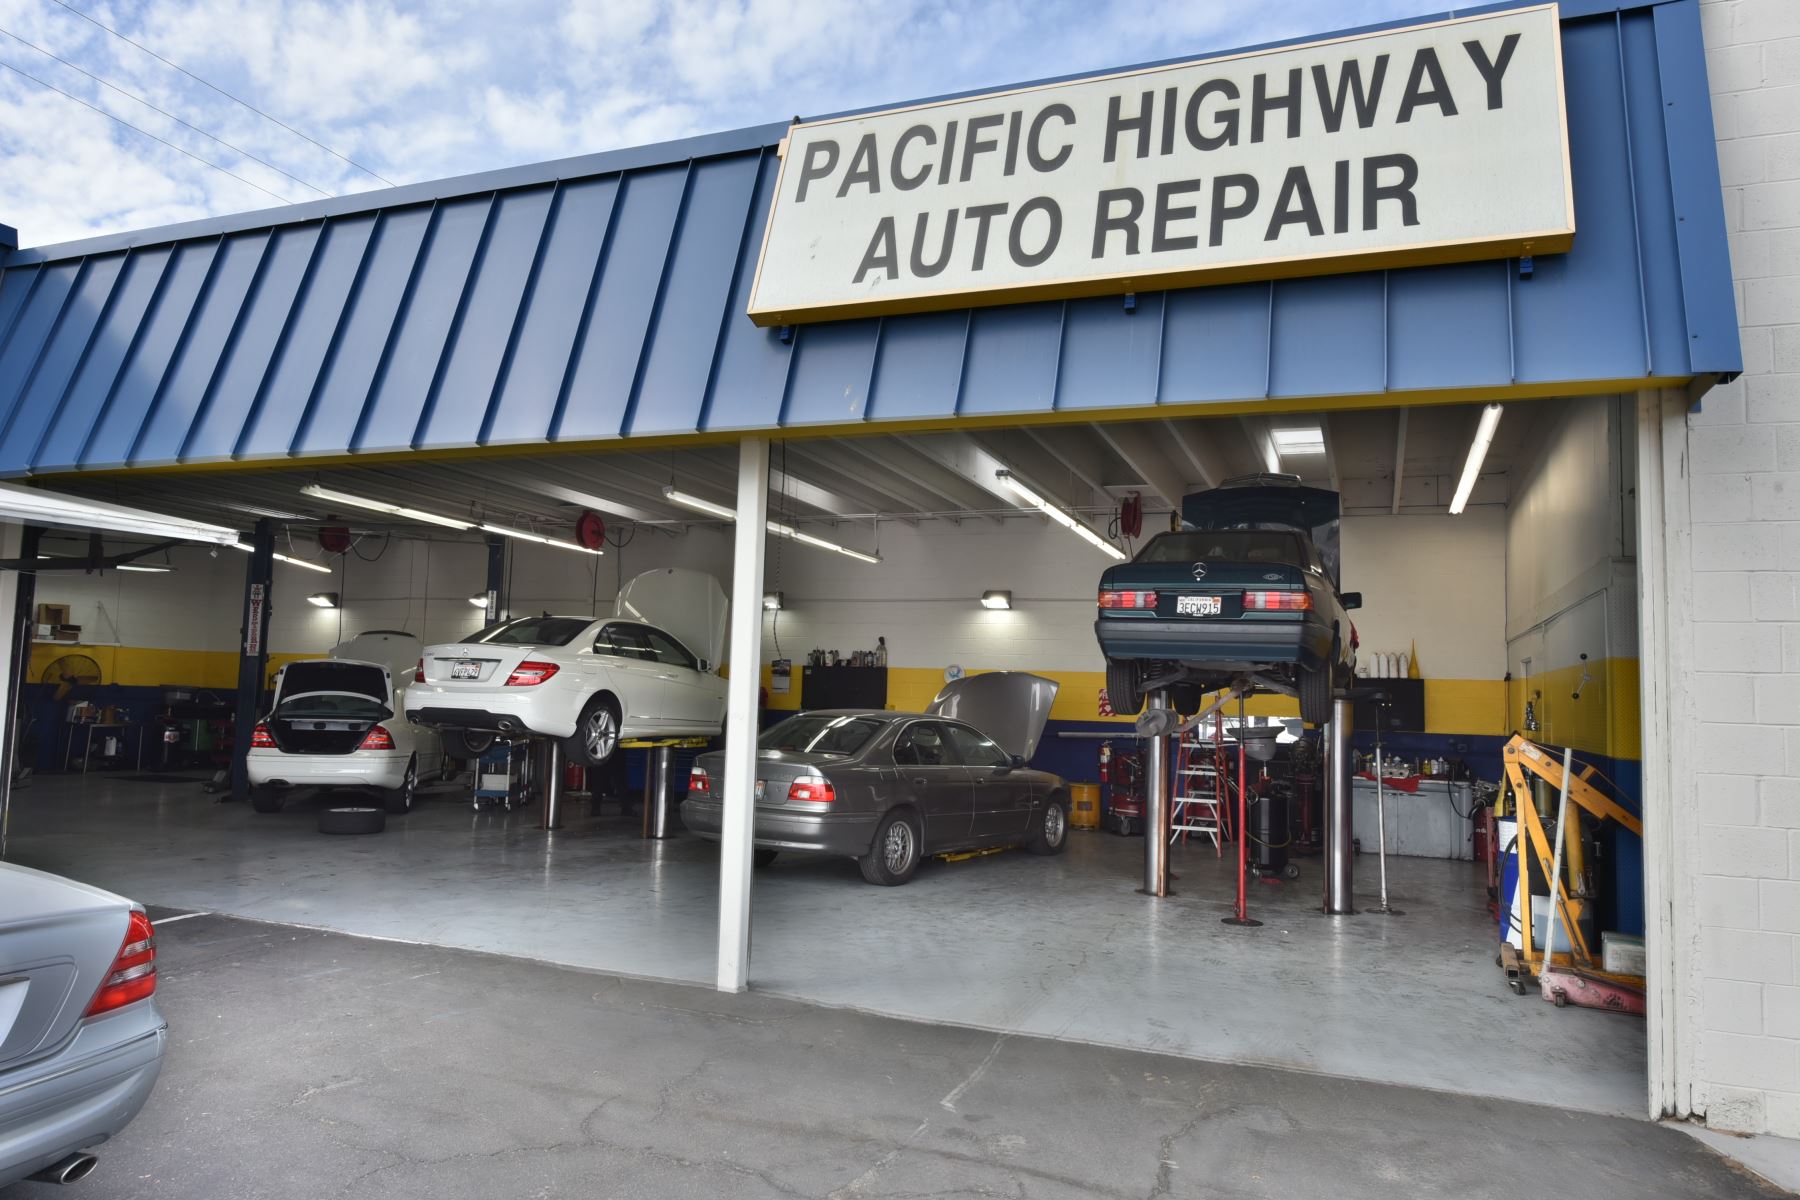 Our Service Bays at Pacific Highway Auto Repair